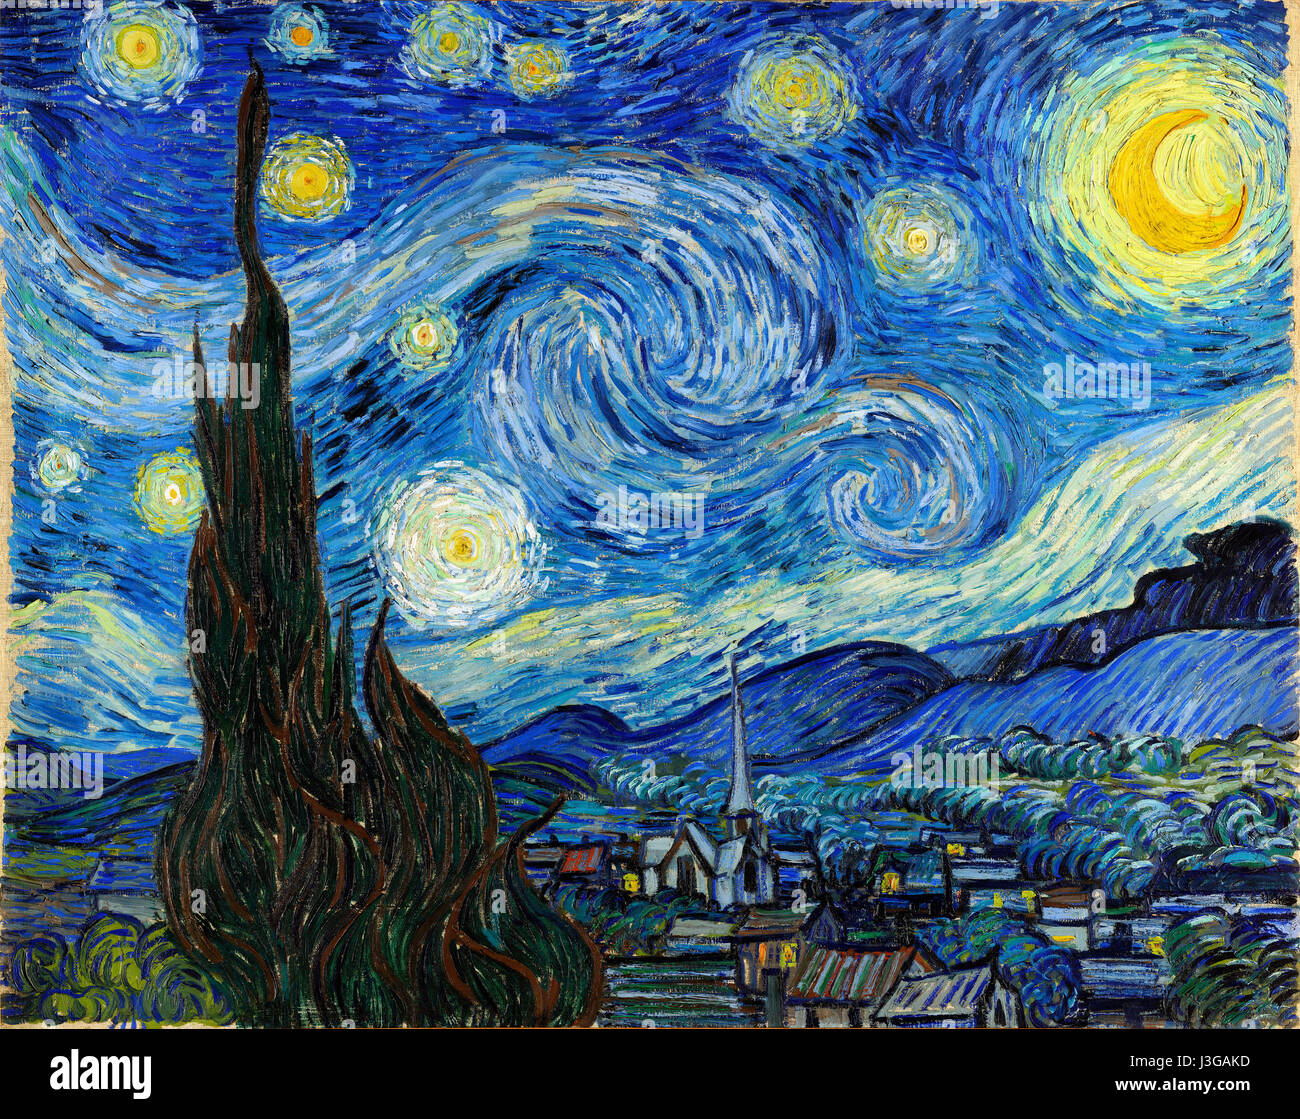 Starry, Starry Night by Vincent Van Gogh Stock Photo